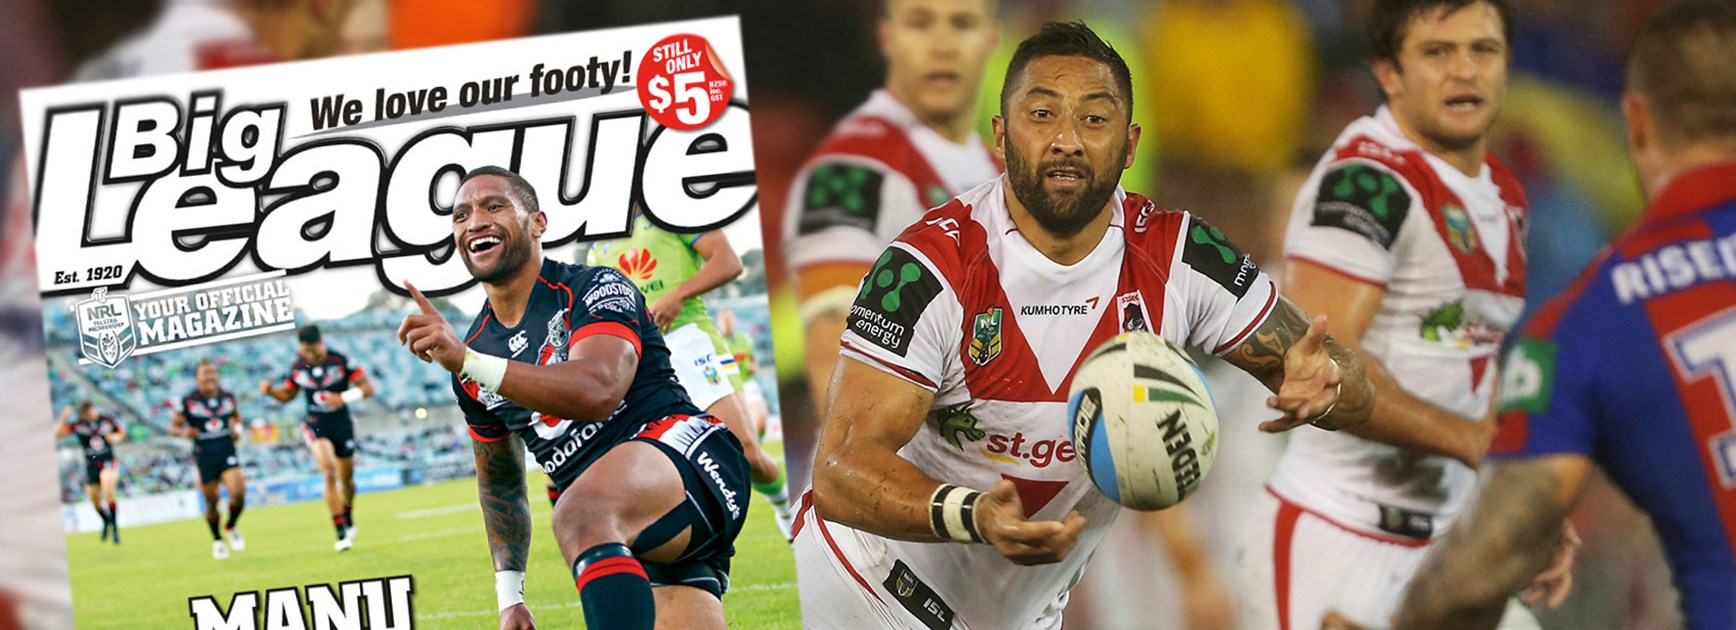 Benji Marshall needs to kick-start the Dragons attack according to former St George Illawarra coach Nathan Brown.